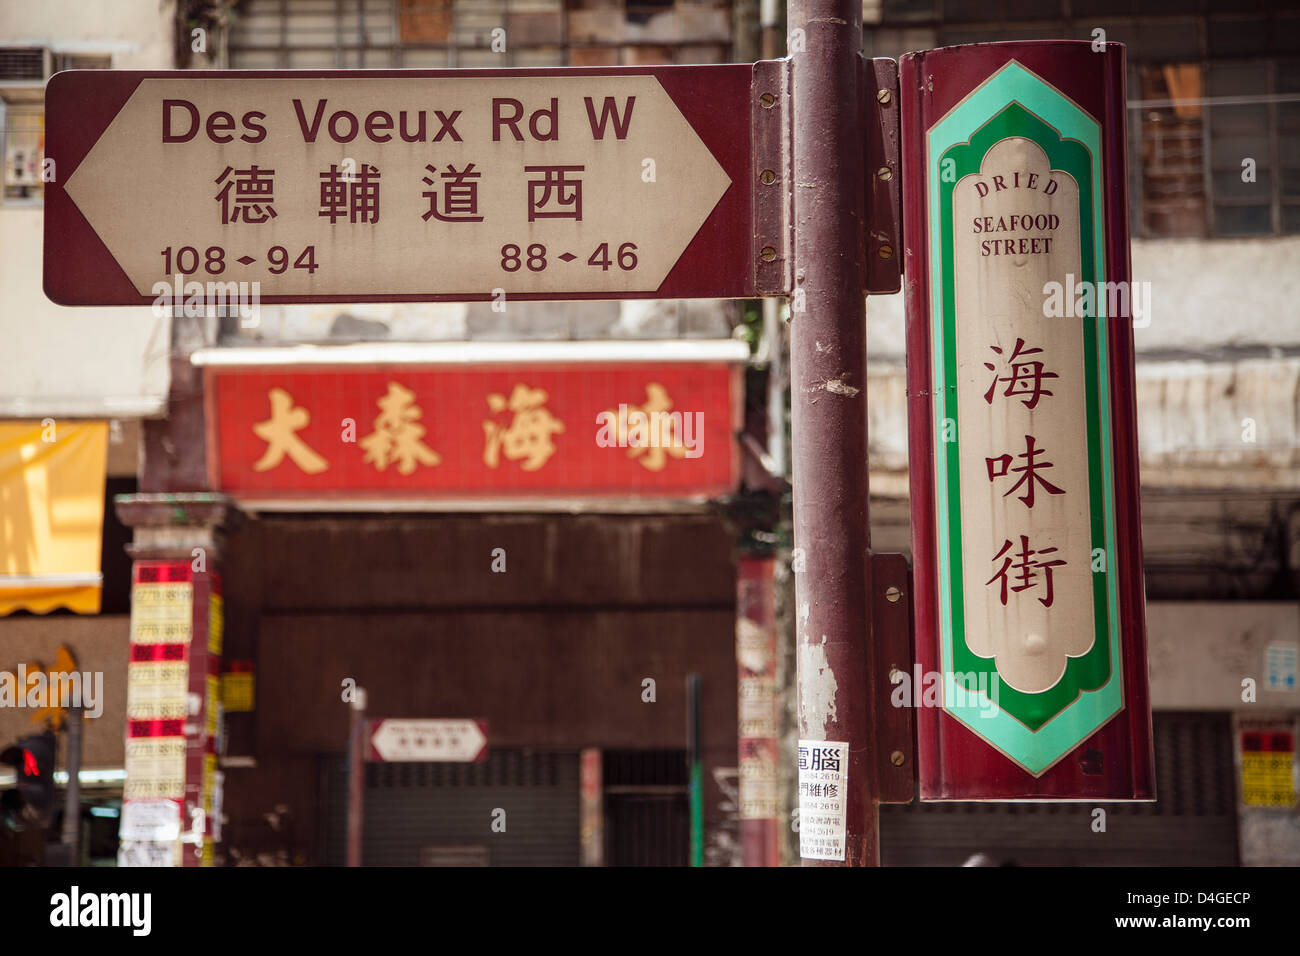 Signs on Dried Seafood Street in Hong Kong Stock Photo